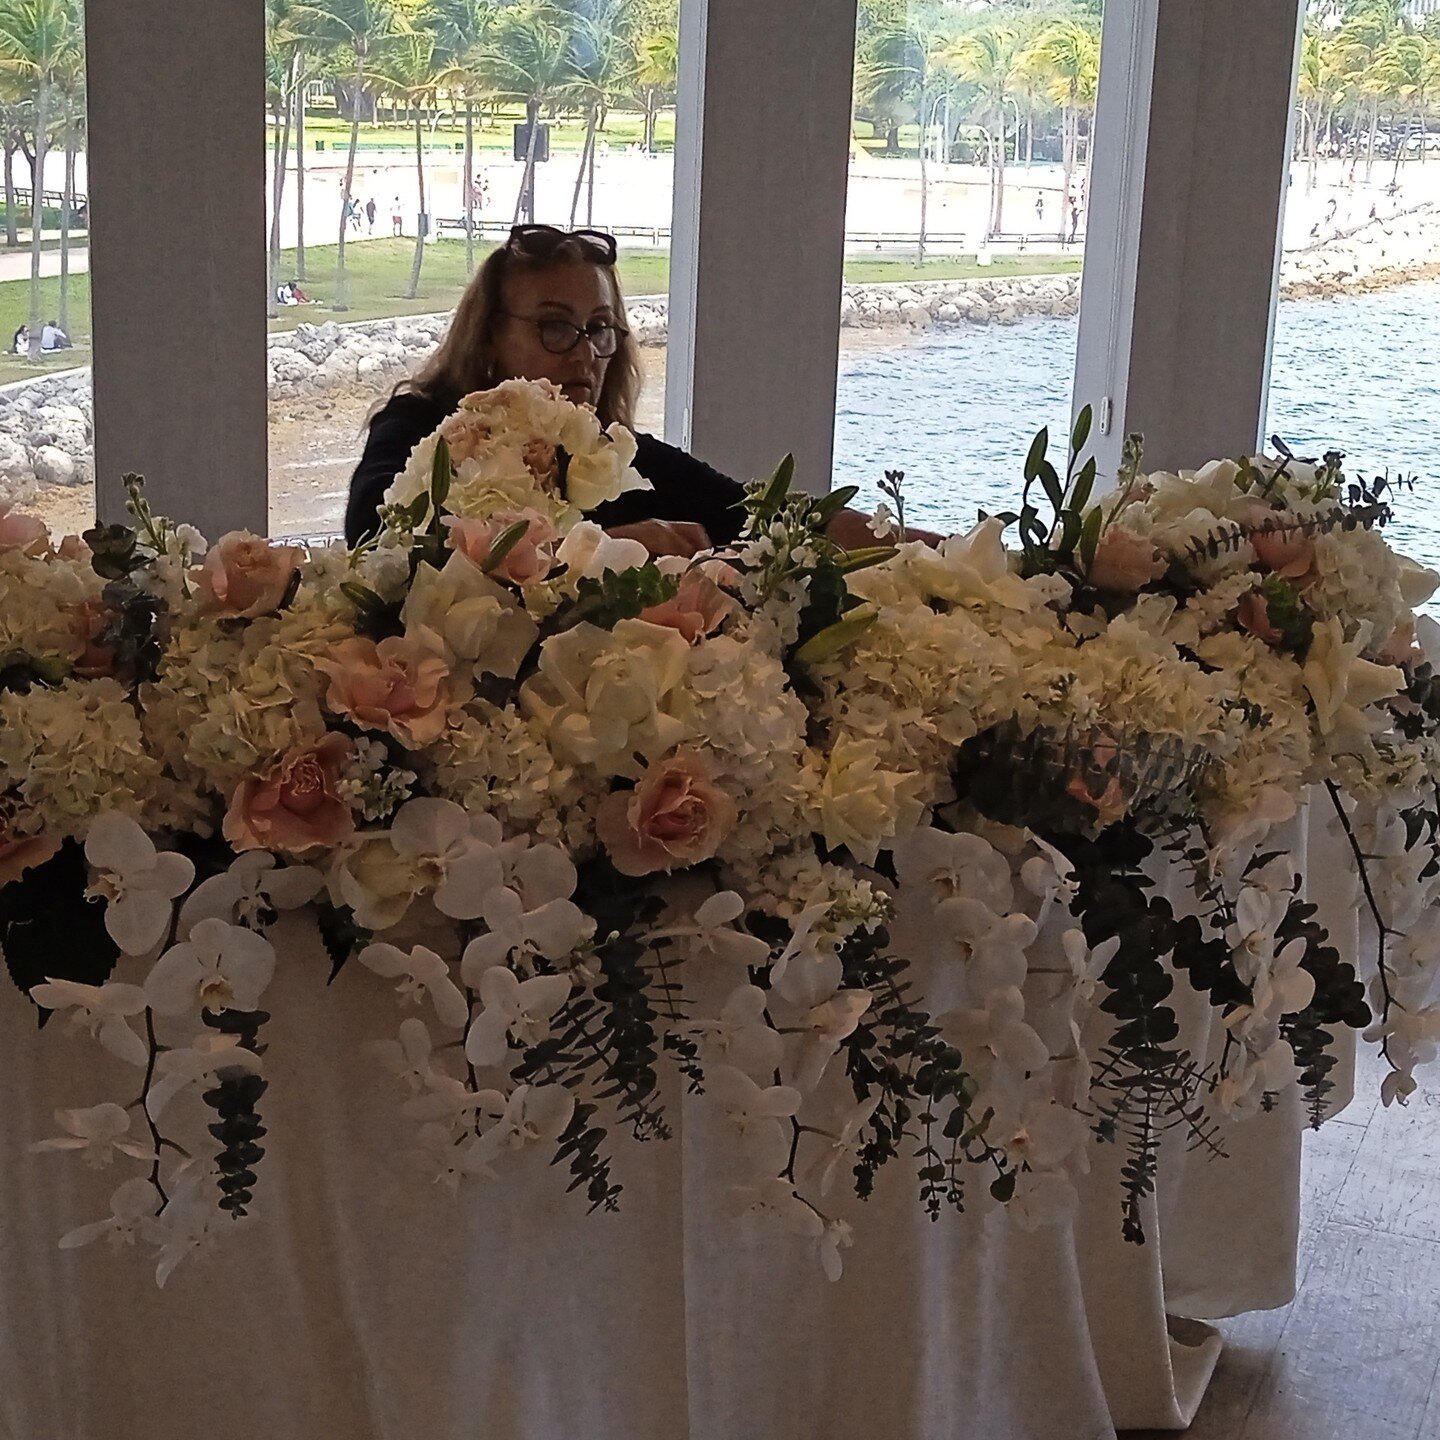 Floral Artist preparing phenomenal decorations to maximize the experience of this unforgetable day!